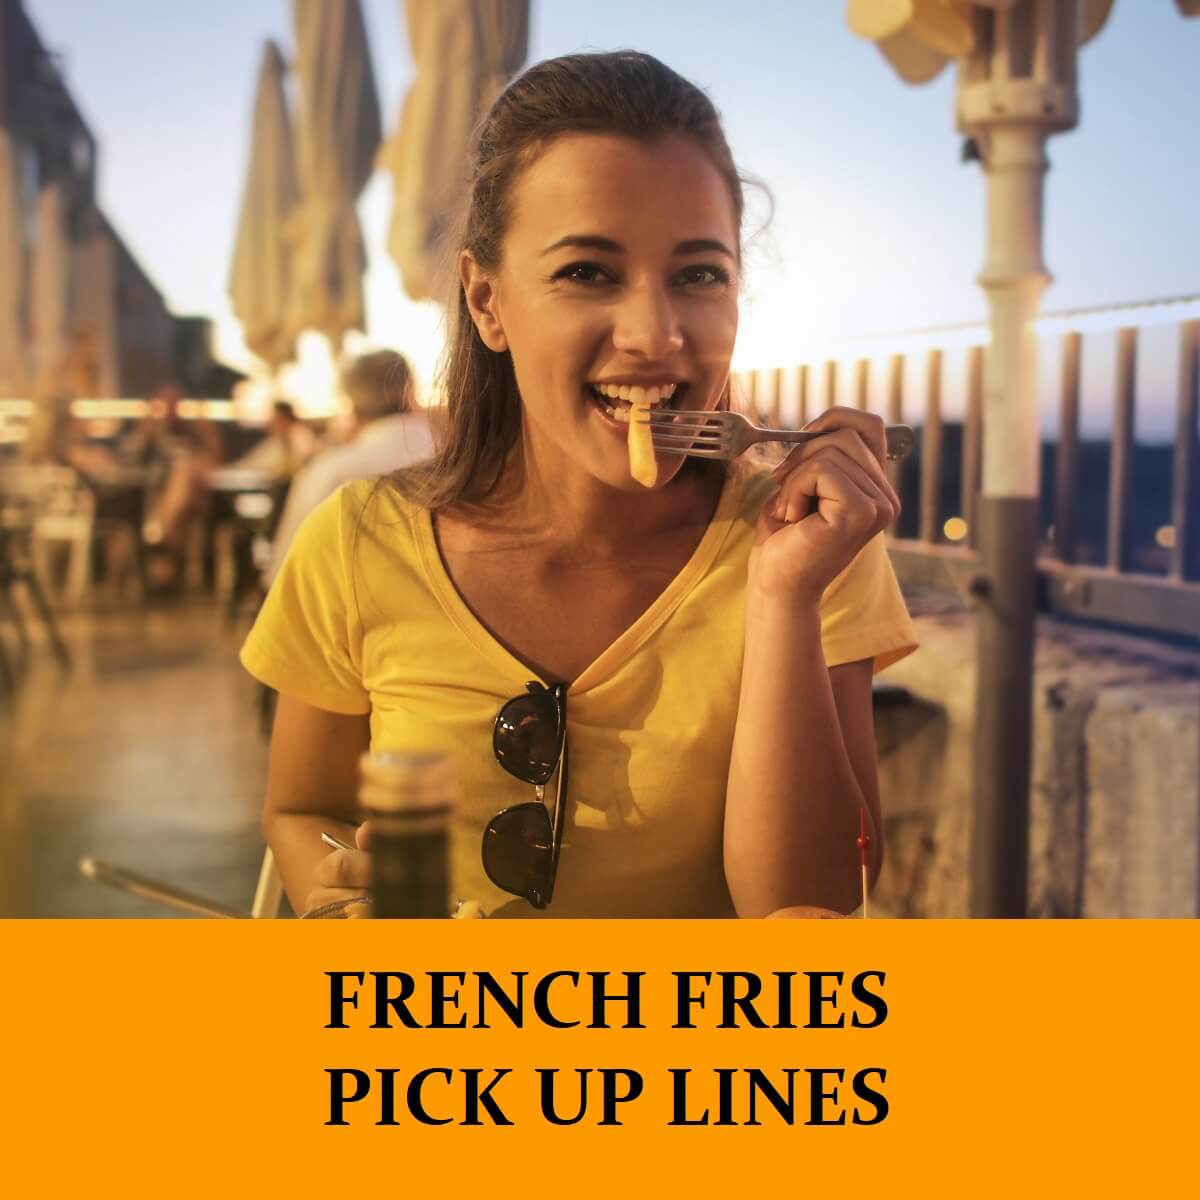 Pick Up Lines About Frecn Fries